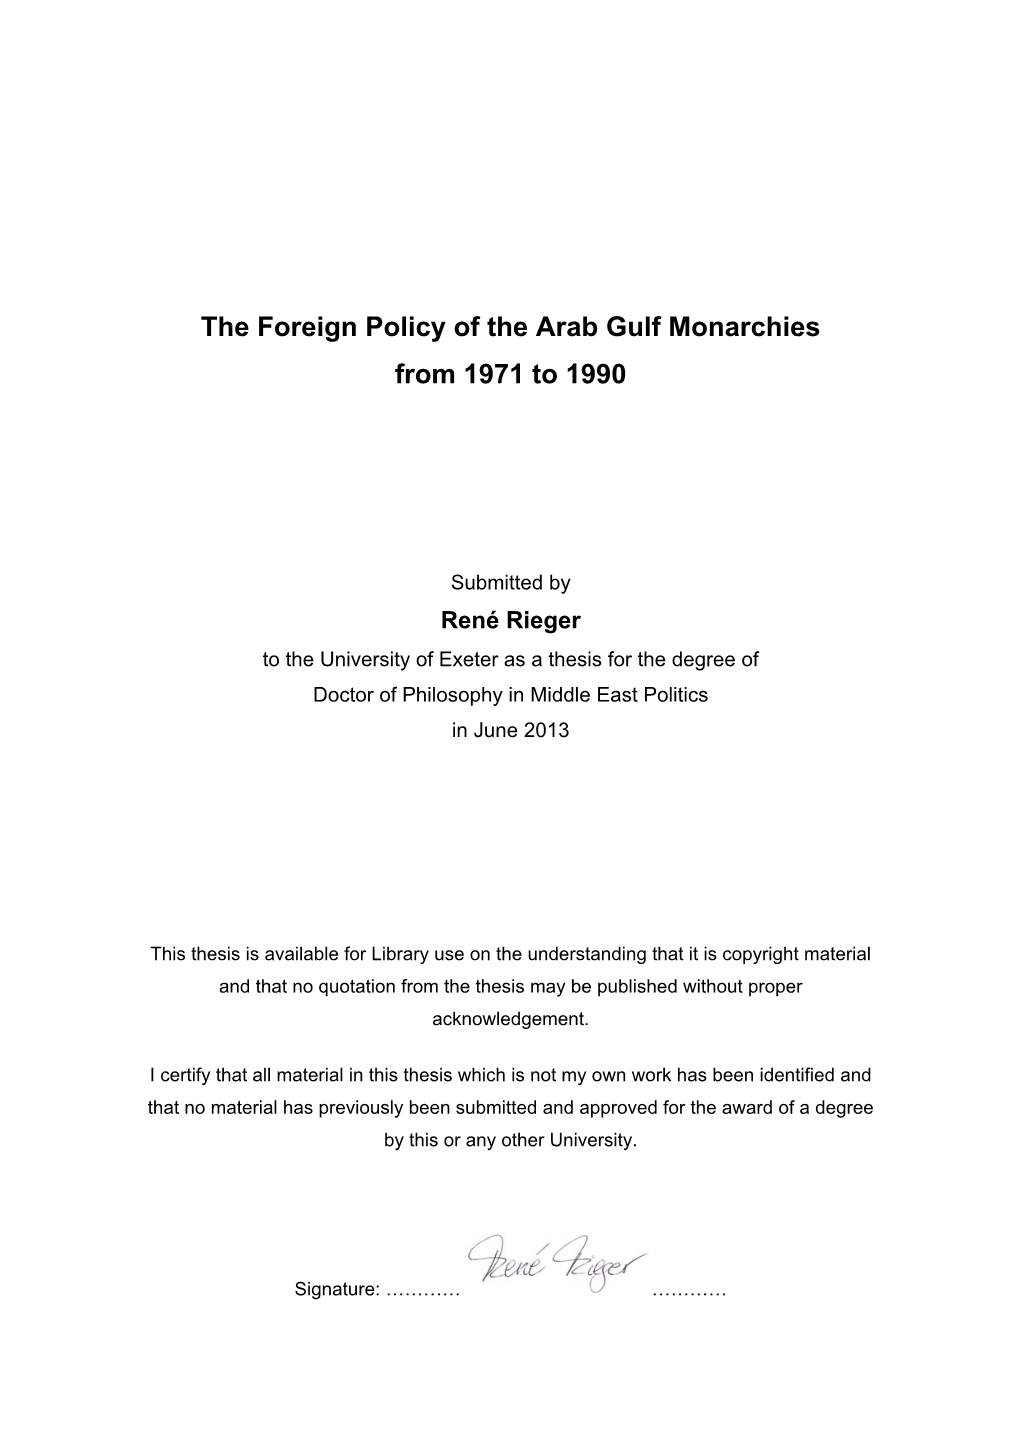 The Foreign Policy of the Arab Gulf Monarchies from 1971 to 1990